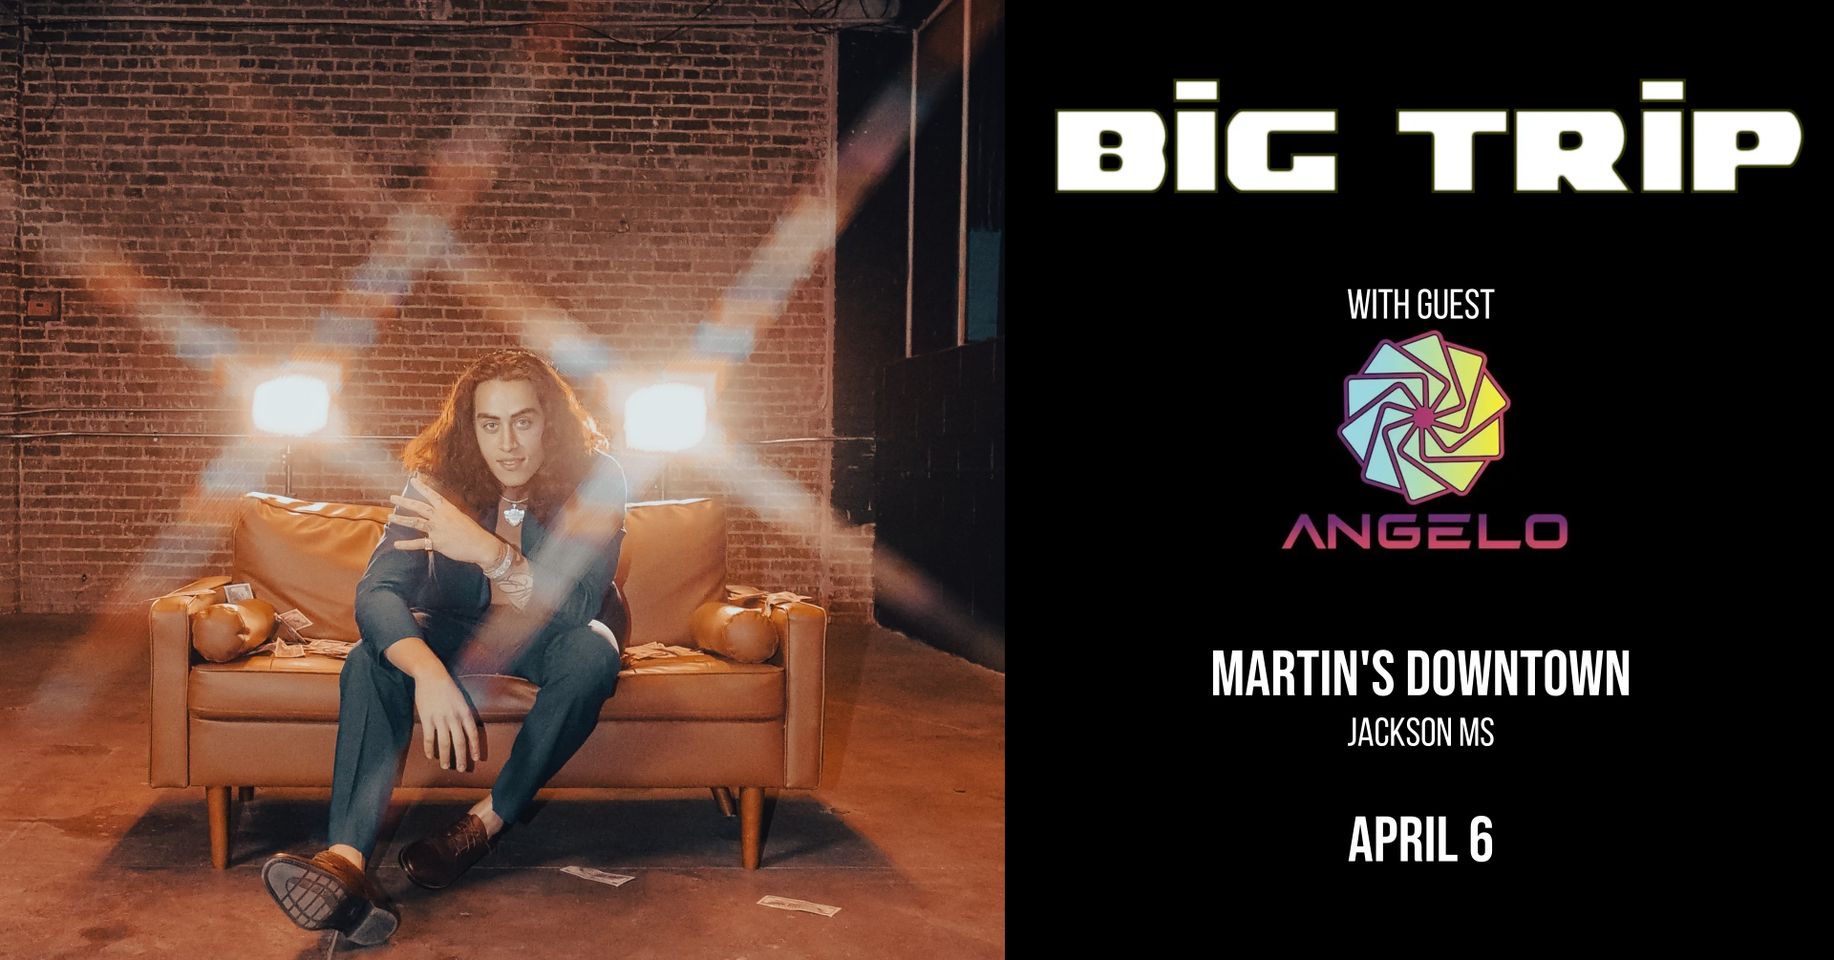 Big Trip with guest ANGLEO live at Martin’s Downtown